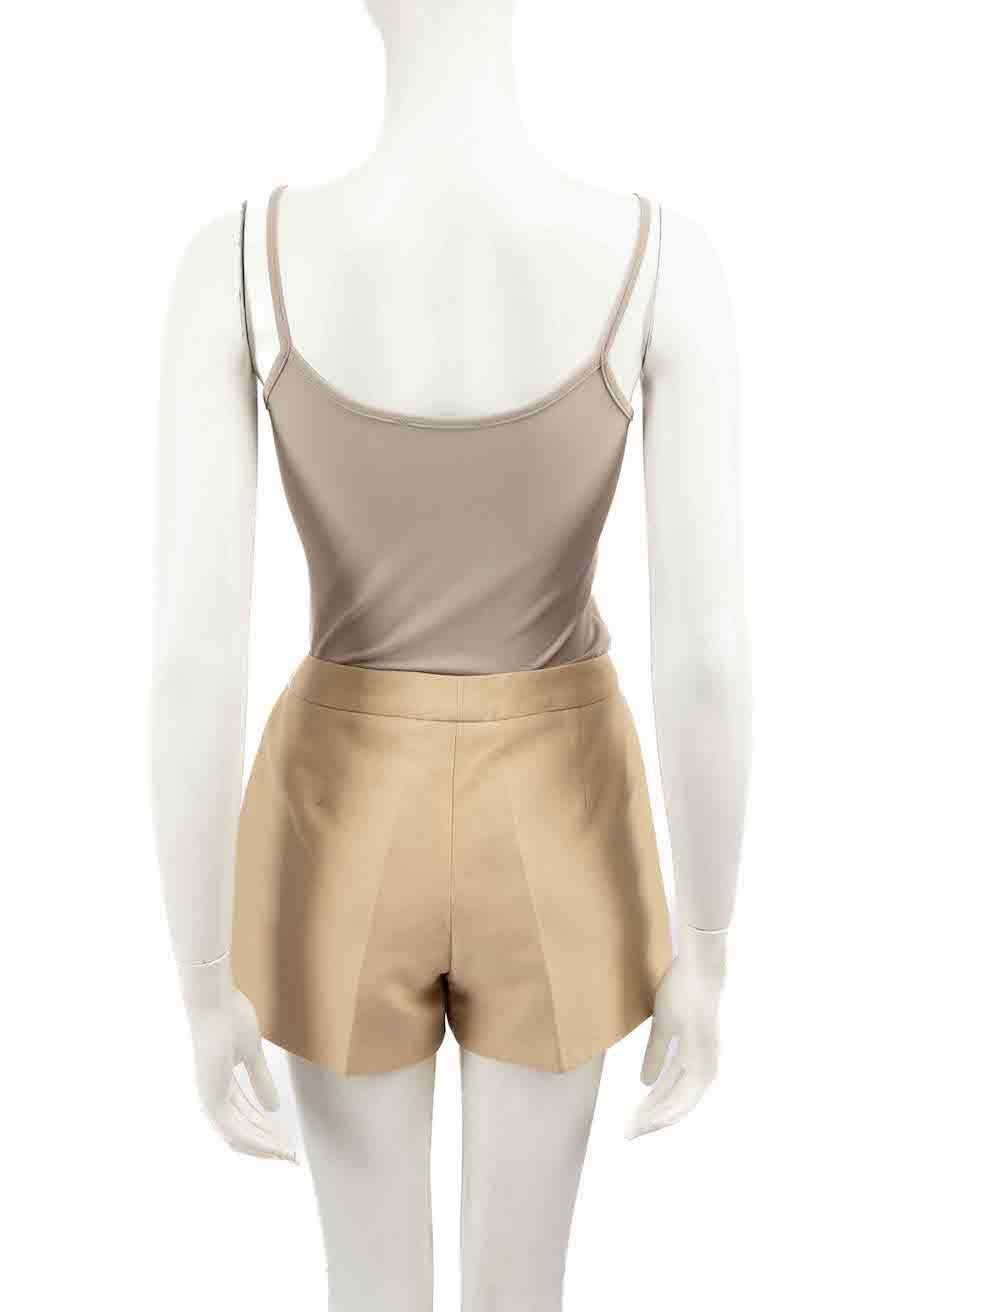 J.Mendel Beige Python Leather Trimmed Shorts Size L In Good Condition For Sale In London, GB